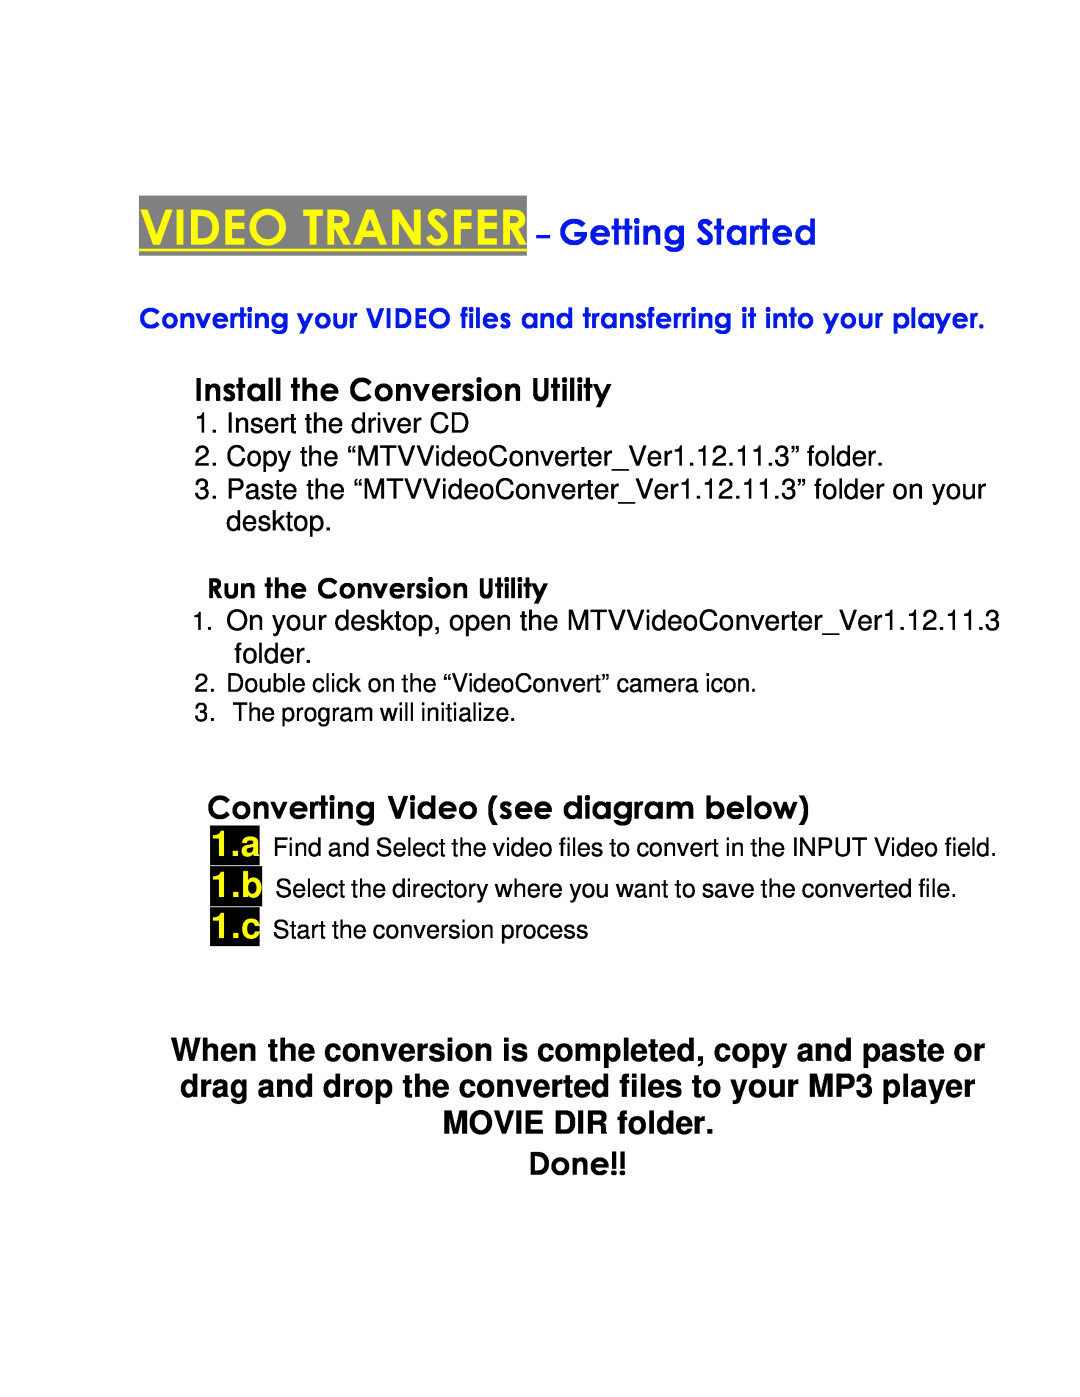 COBY electronic MPC7055 setup guide VIDEO TRANSFER- Getting Started, 1.a 1.b 1.c, Install the Conversion Utility, Done 